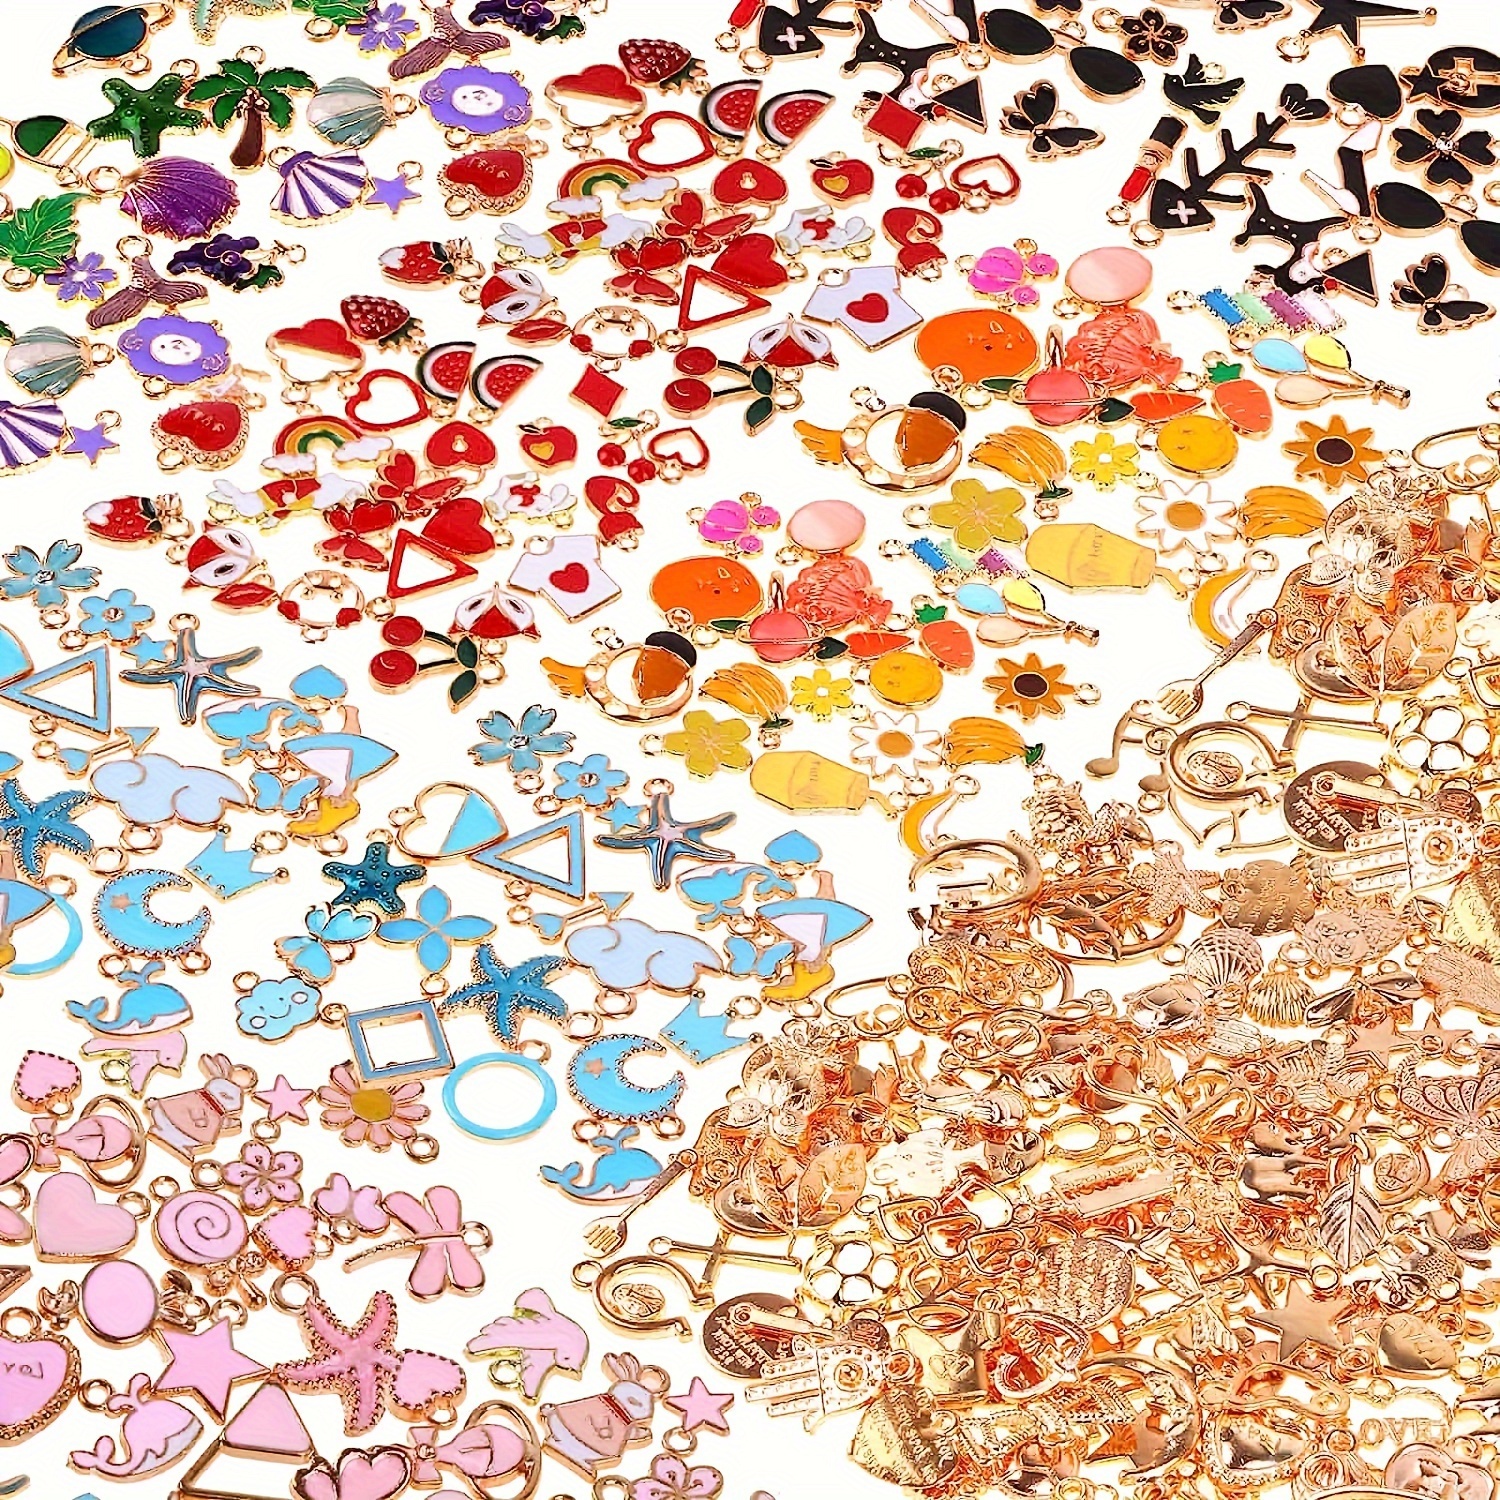 30pcs Metal Mixed Charms DIY Vintage Alloy Charms Bulk Bracelet Pendant  Necklace Accessories For Jewelry Making Findings